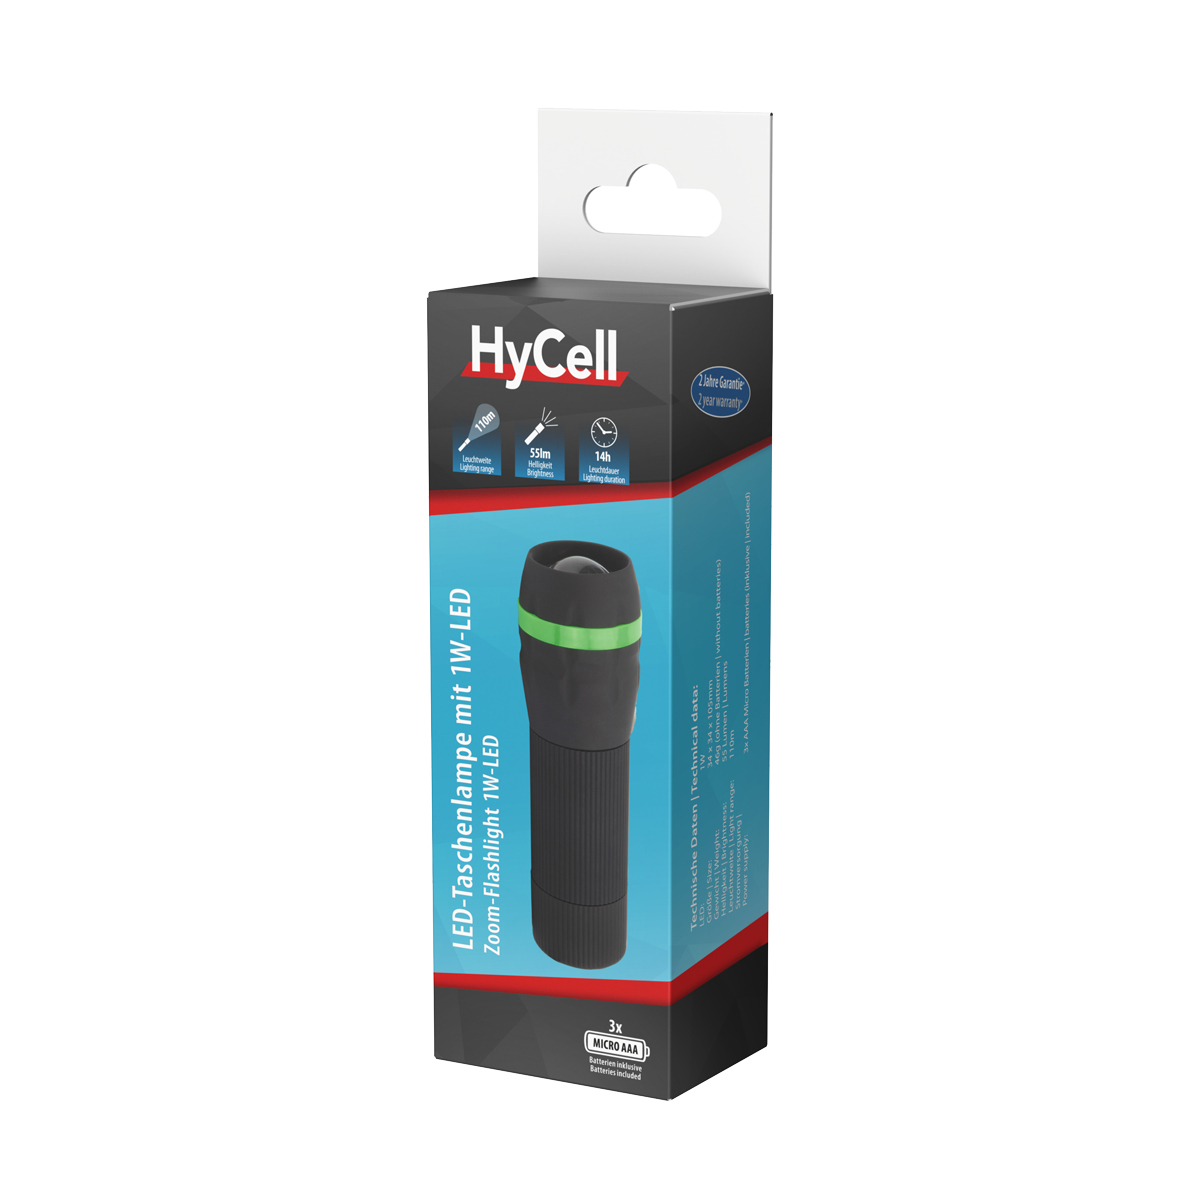 Hycell zoom flashlight with LED